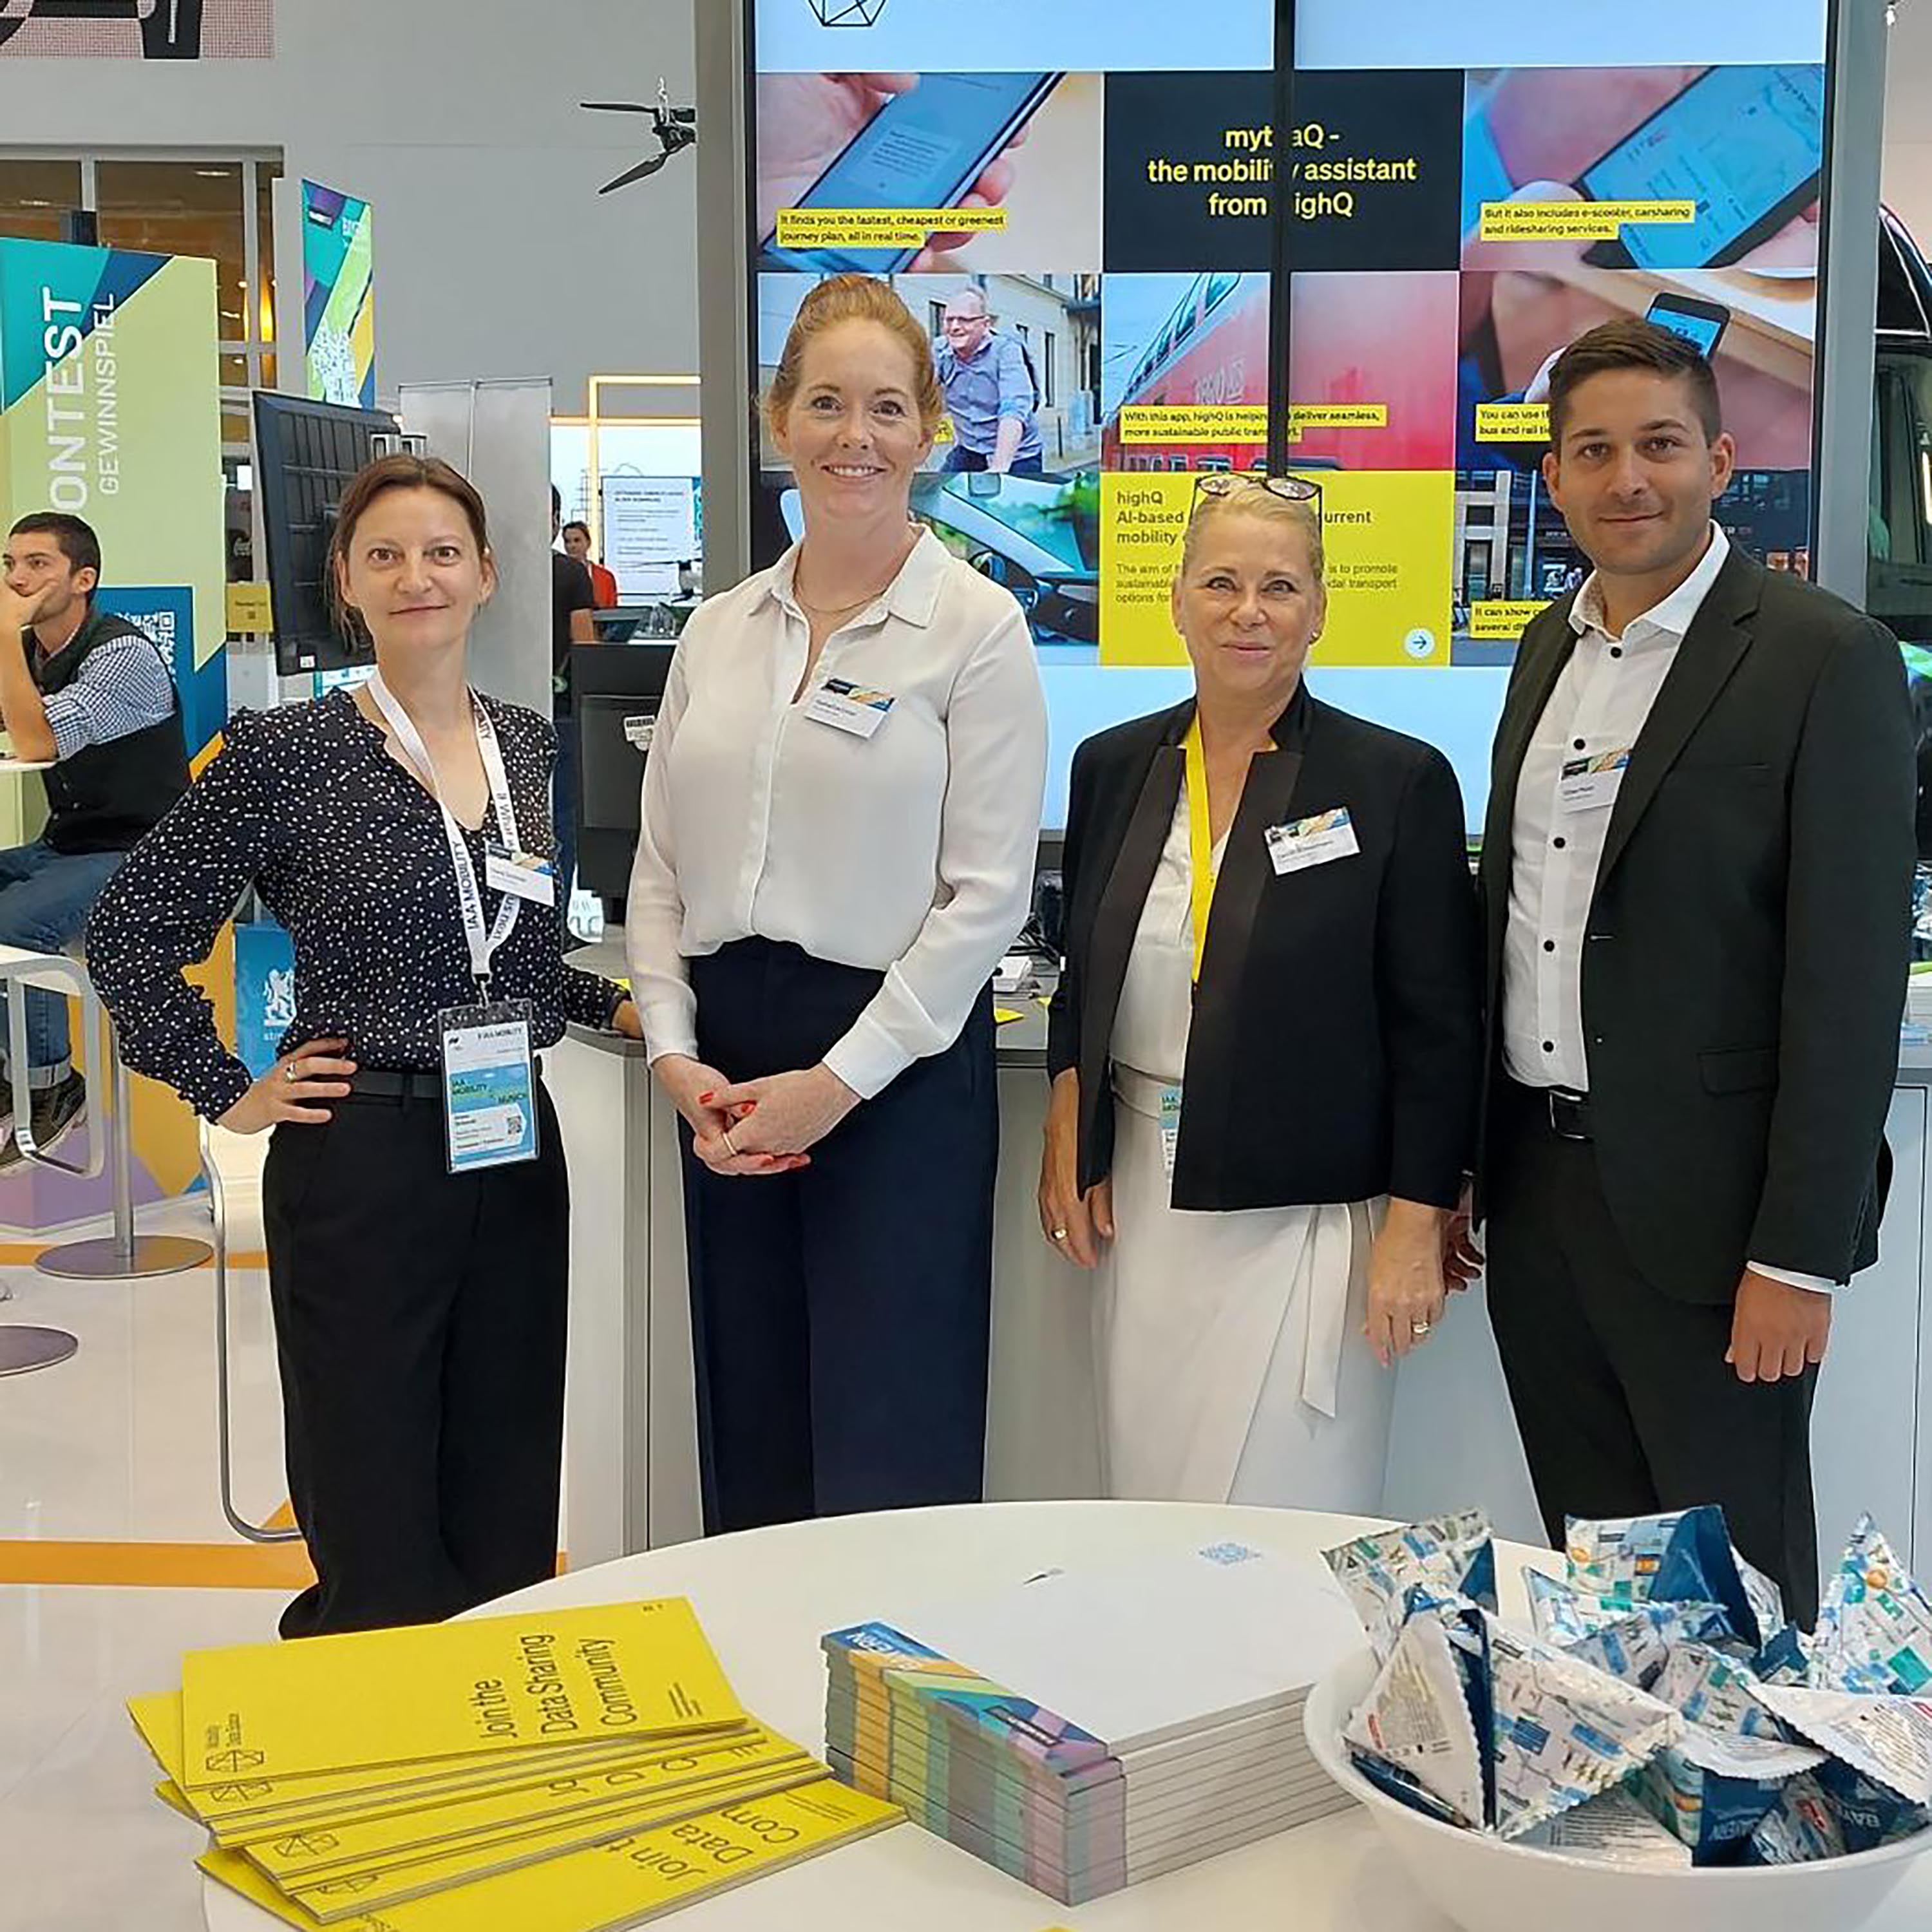 The picture shows four people standing next to each other, smiling at the camera. They are at a trade fair stand. In the background is a screen showing a presentation. In the foreground there is a table with flyers and small promotional gifts.